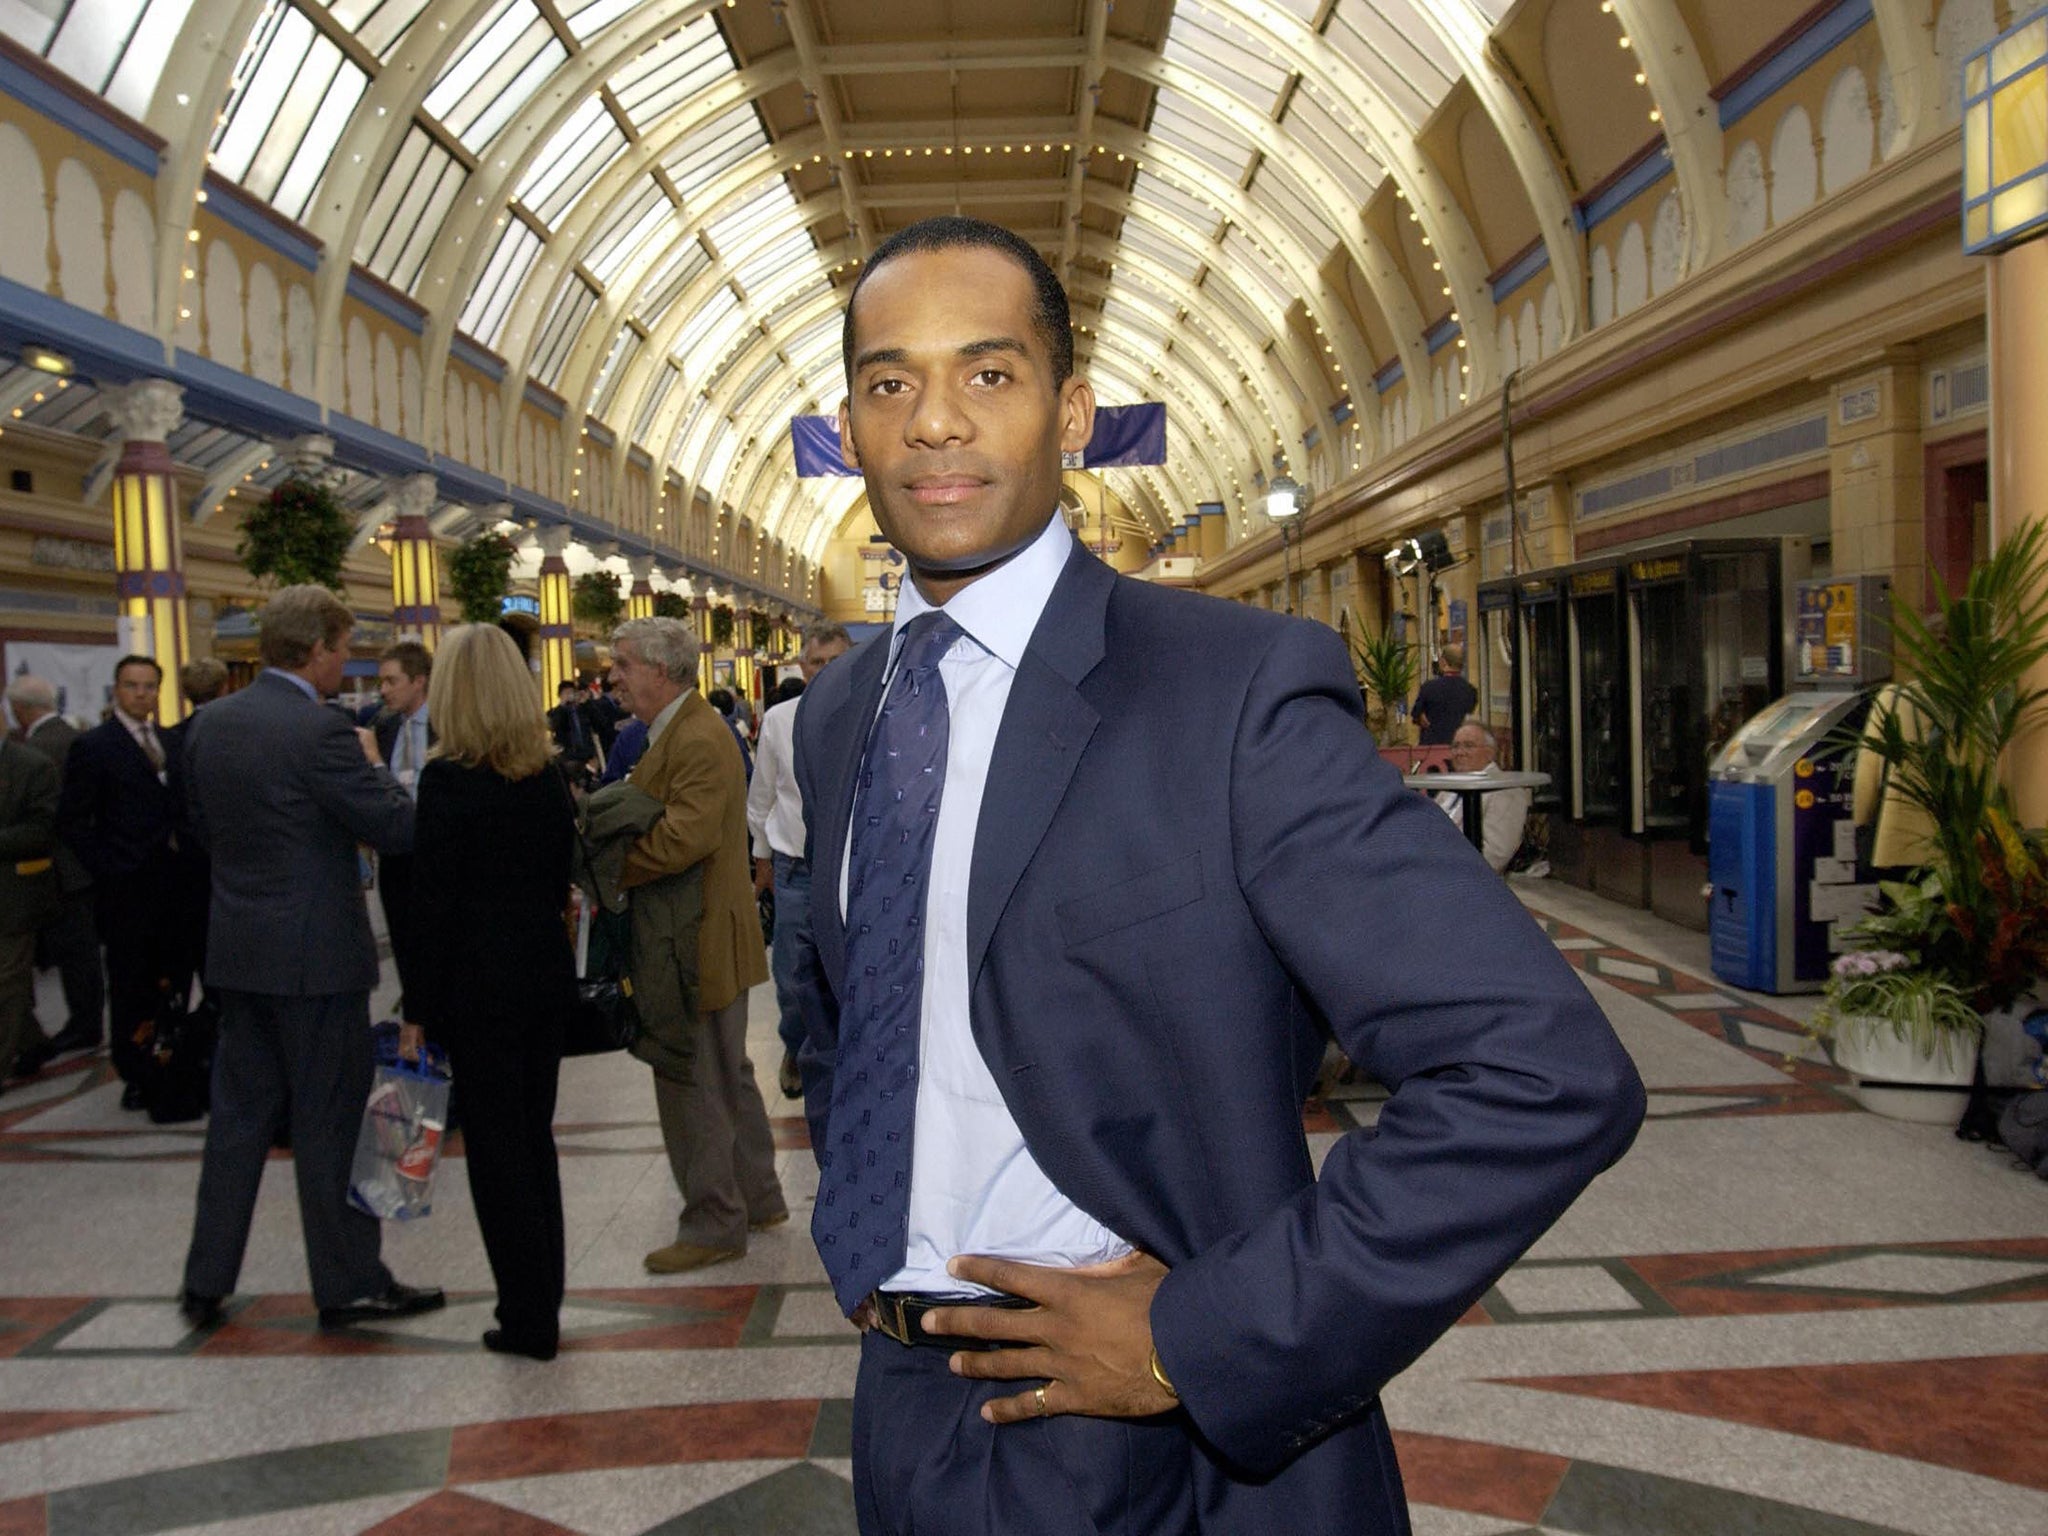 Adam Afriyie appears to be finding it tricky to juggle his parliamentary and financial workload